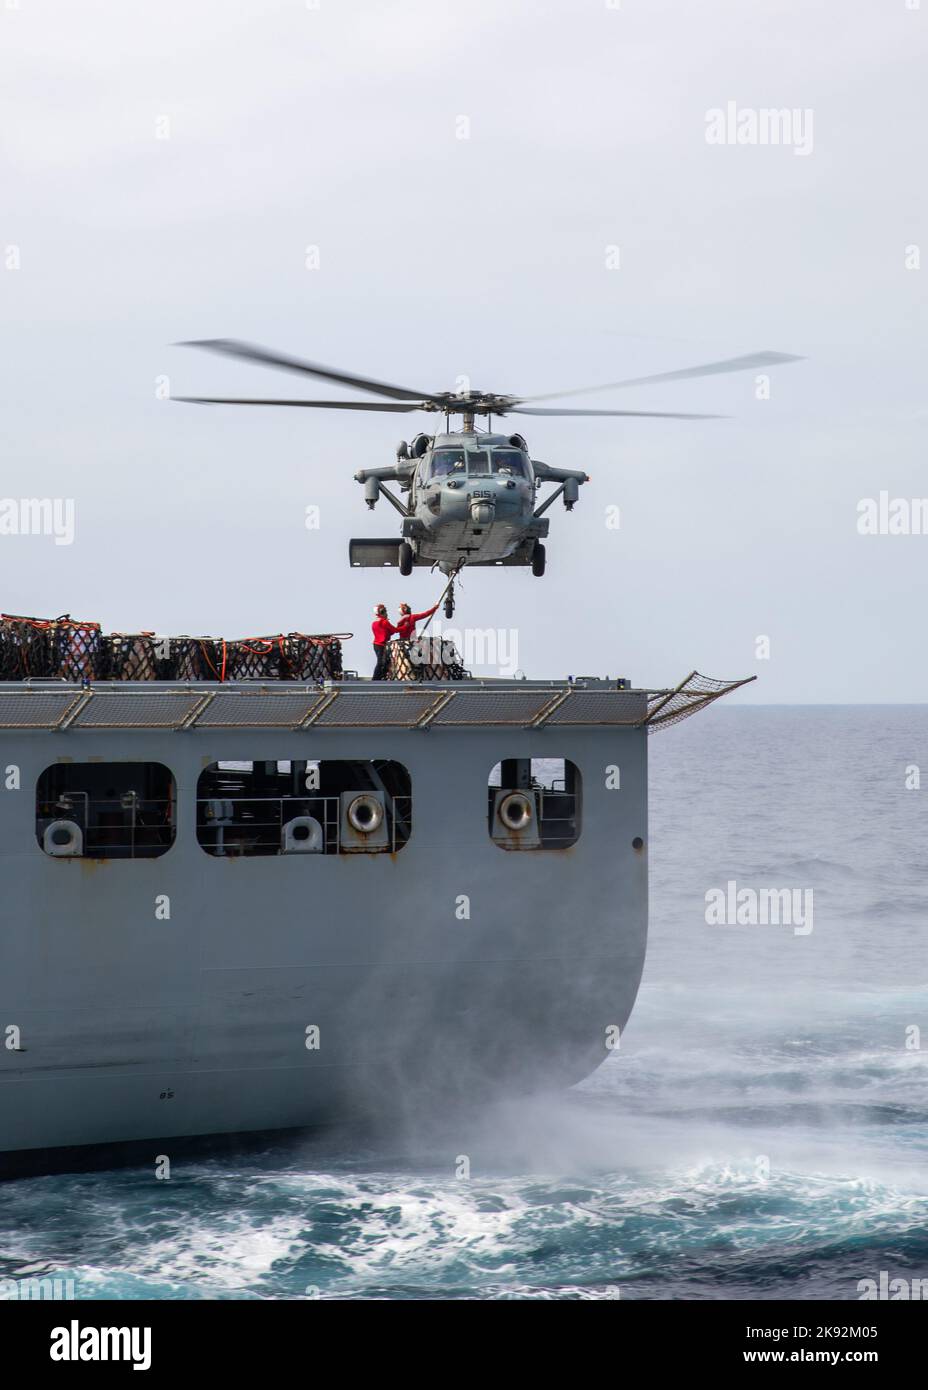 221023-N-ET093-1051 ADRIATIC SEA (Oct 23, 2022) Sailors assigned to the Lewis and Clark-class dry cargo and ammunition ship USNS William Mclean (T-AKE 12), attach cargo to an MH-60S Nighthawk helicopter, attached to Helicopter Sea Combat Squadron (HSC) 5, during a replenishment-at-sea with the Nimitz-class aircraft carrier USS George H.W. Bush (CVN 77), Oct. 23, 2022. Carrier Air Wing (CVW) 7 is the offensive air and strike component of Carrier Strike Group 10, George H.W. Bush Carrier Strike Group (CSG). The squadrons of CVW-7 are Strike Fighter Squadron (VFA) 86, VFA-103, VFA-136, VFA-143, C Stock Photo